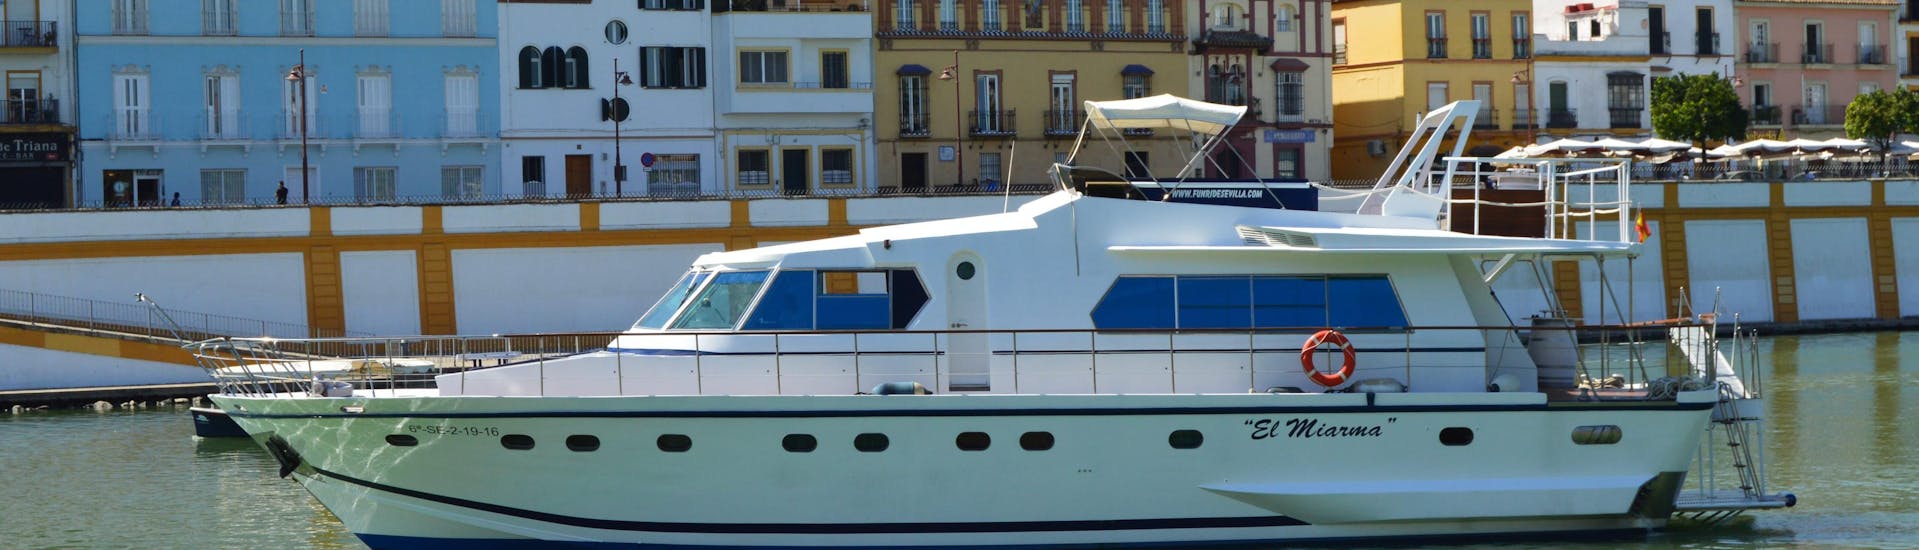 The tour participants look forward to getting to know Seville in all its facets during their Boat trip on the Río Guadalquivir with Seville City Tour from Fun Ride Sevilla.